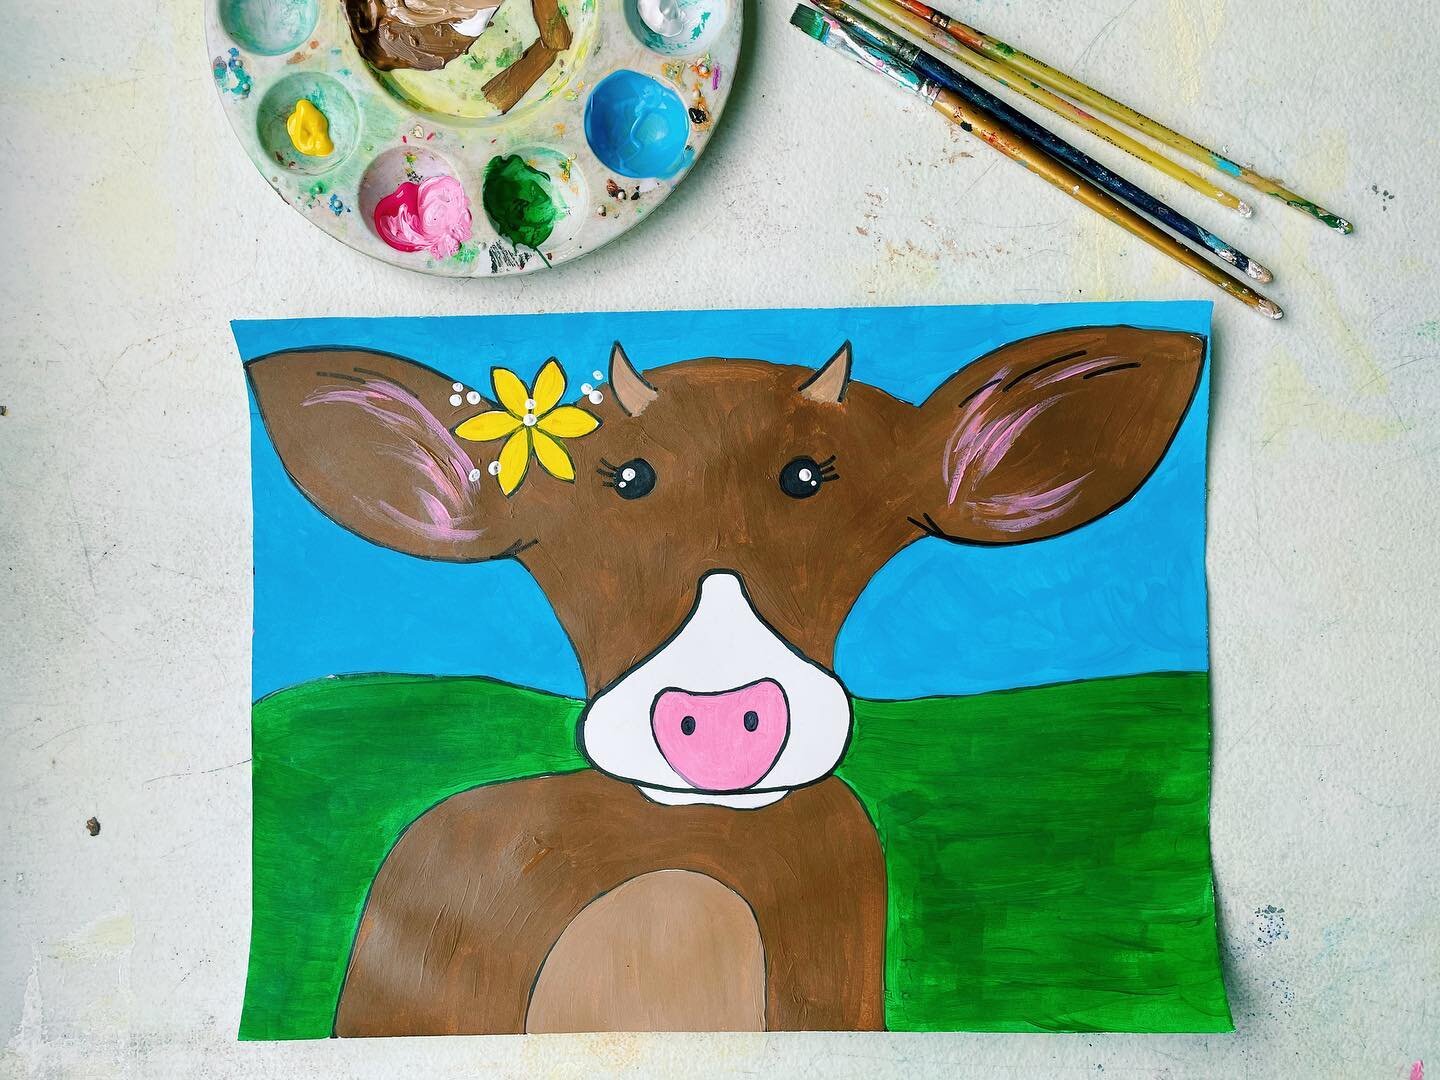 Virtual Homeschool Art Class 🐮🌼🎨

Today we painted some super adorable cows! You can find our homeschool classes on our website: www.artsypartsy.net

#artsypartsymd #homeschool #virtual #cows #painting #canvaspainting #fun #kids #art #canvas #farm